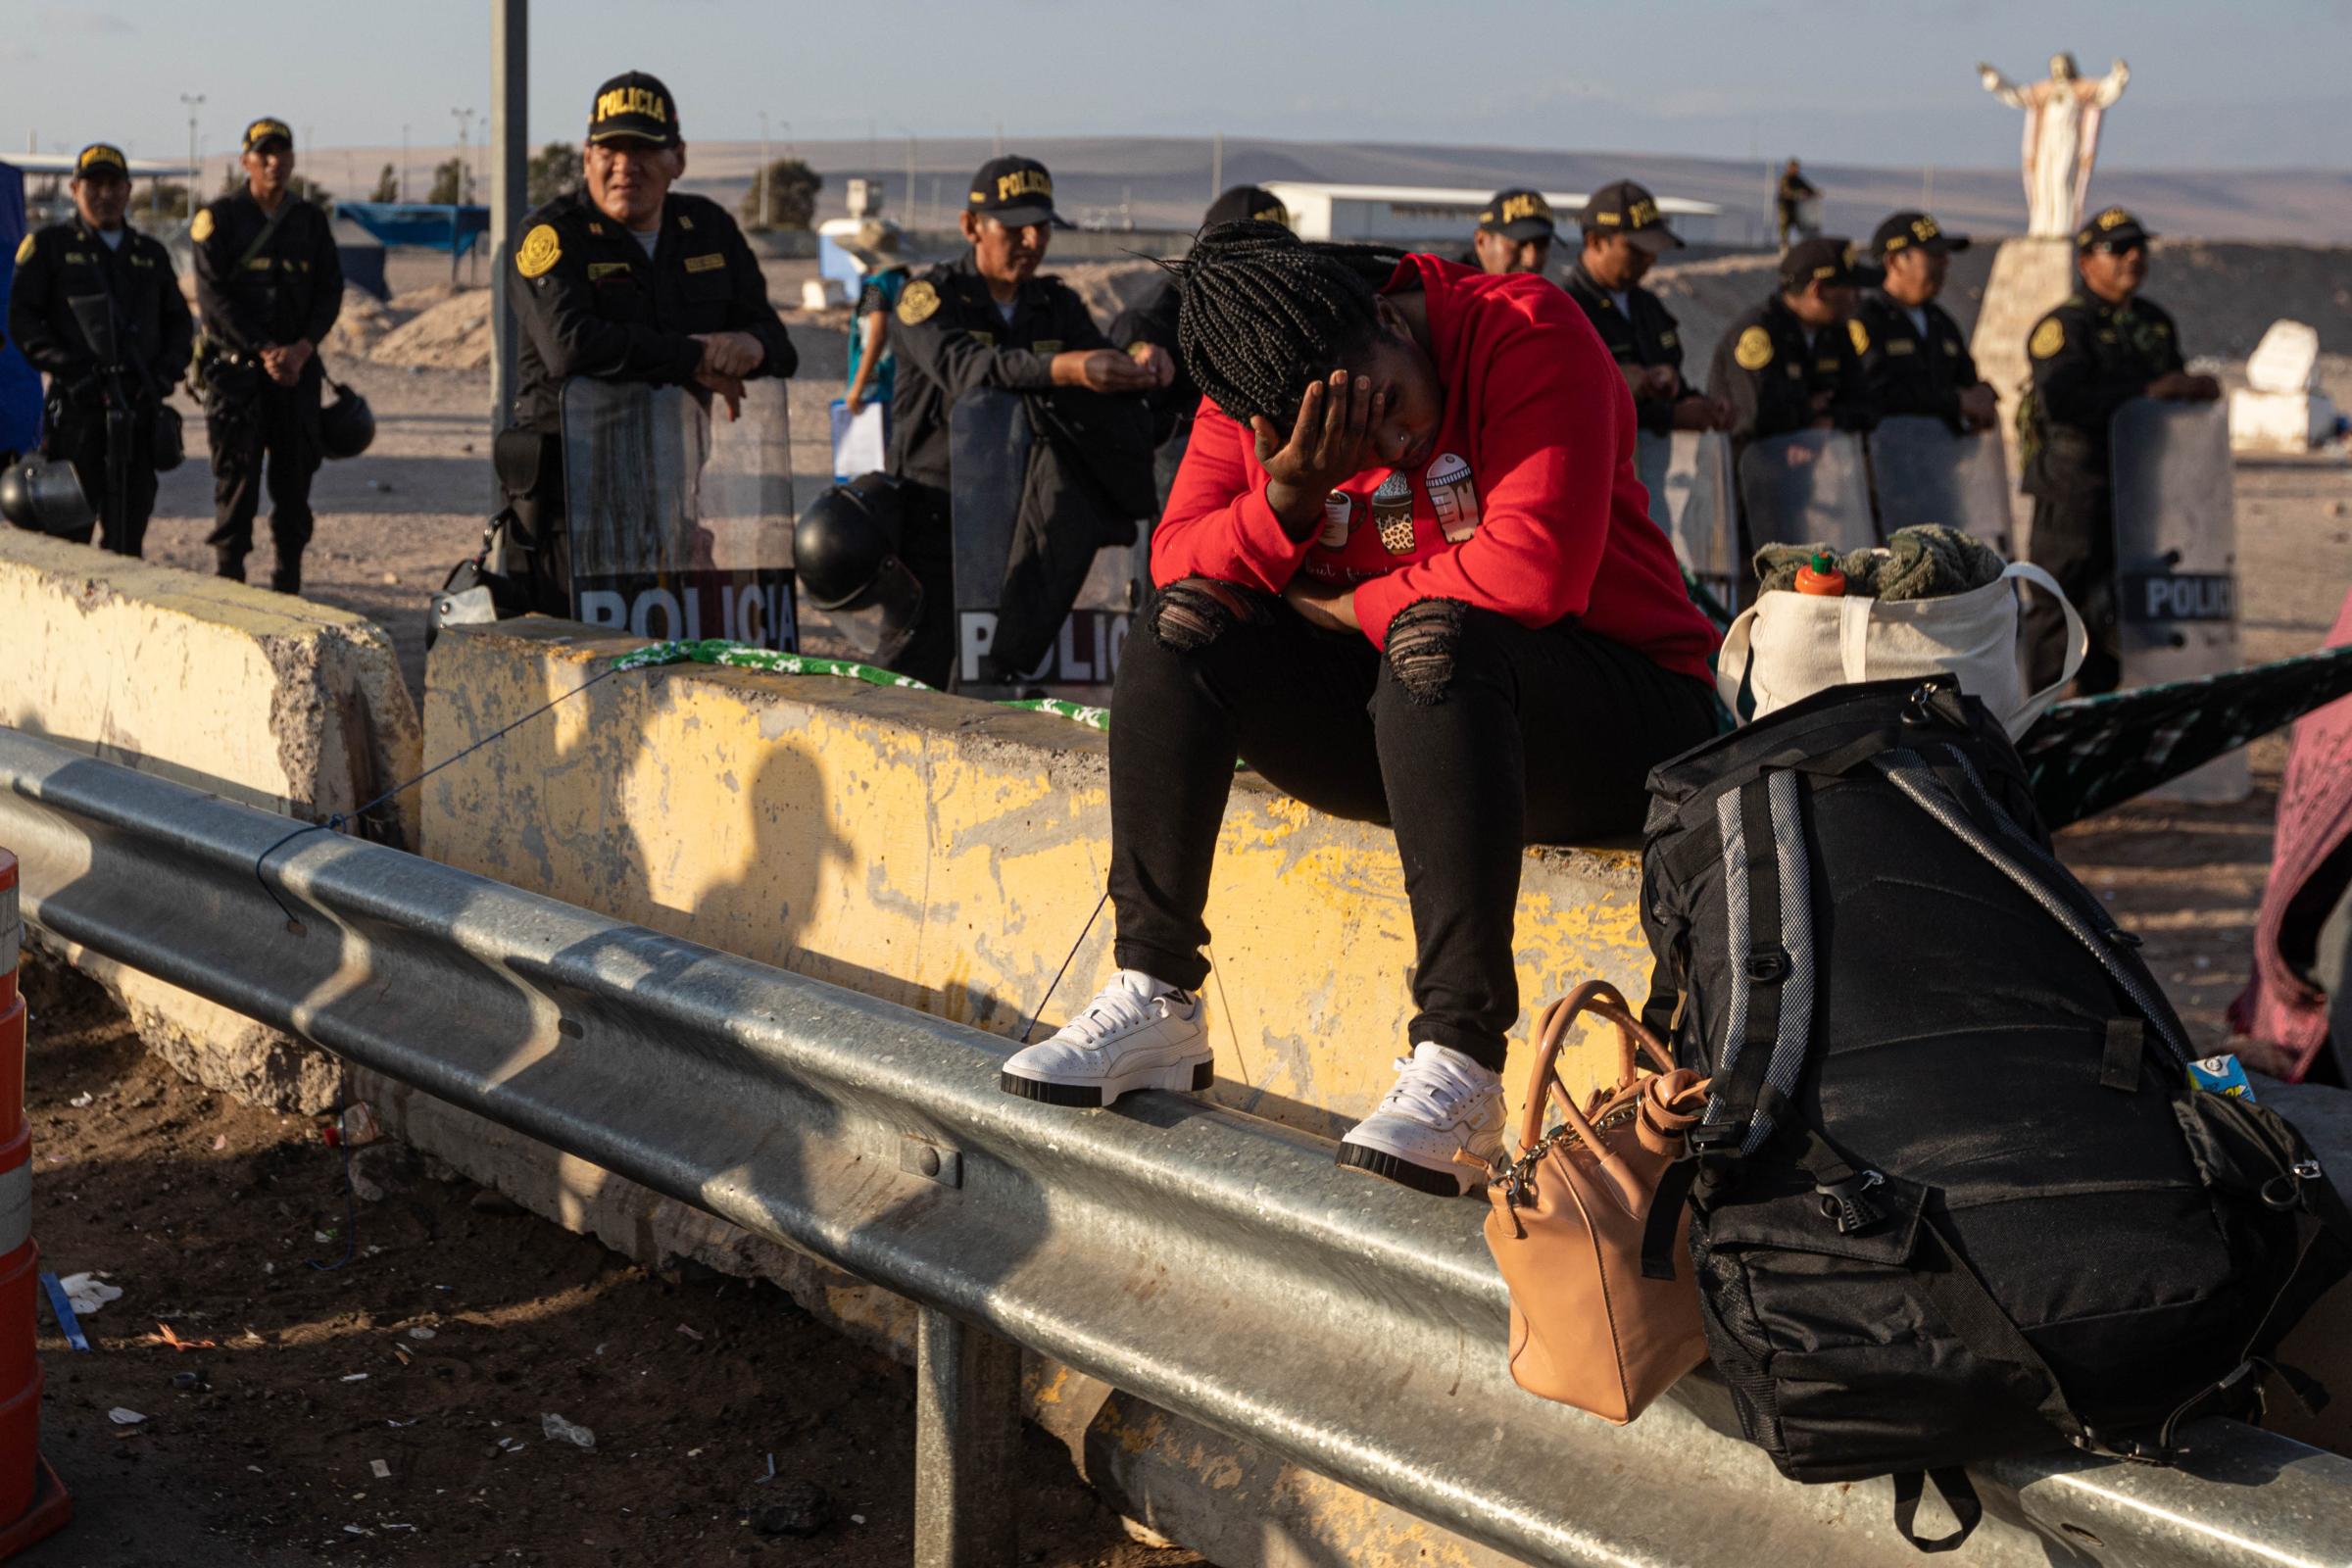 Fear, cold and xenophobia: broken dreams on the Chilean border - Migrants remain stranded at the Chacalluta border crossing, where they hope to resolve their...